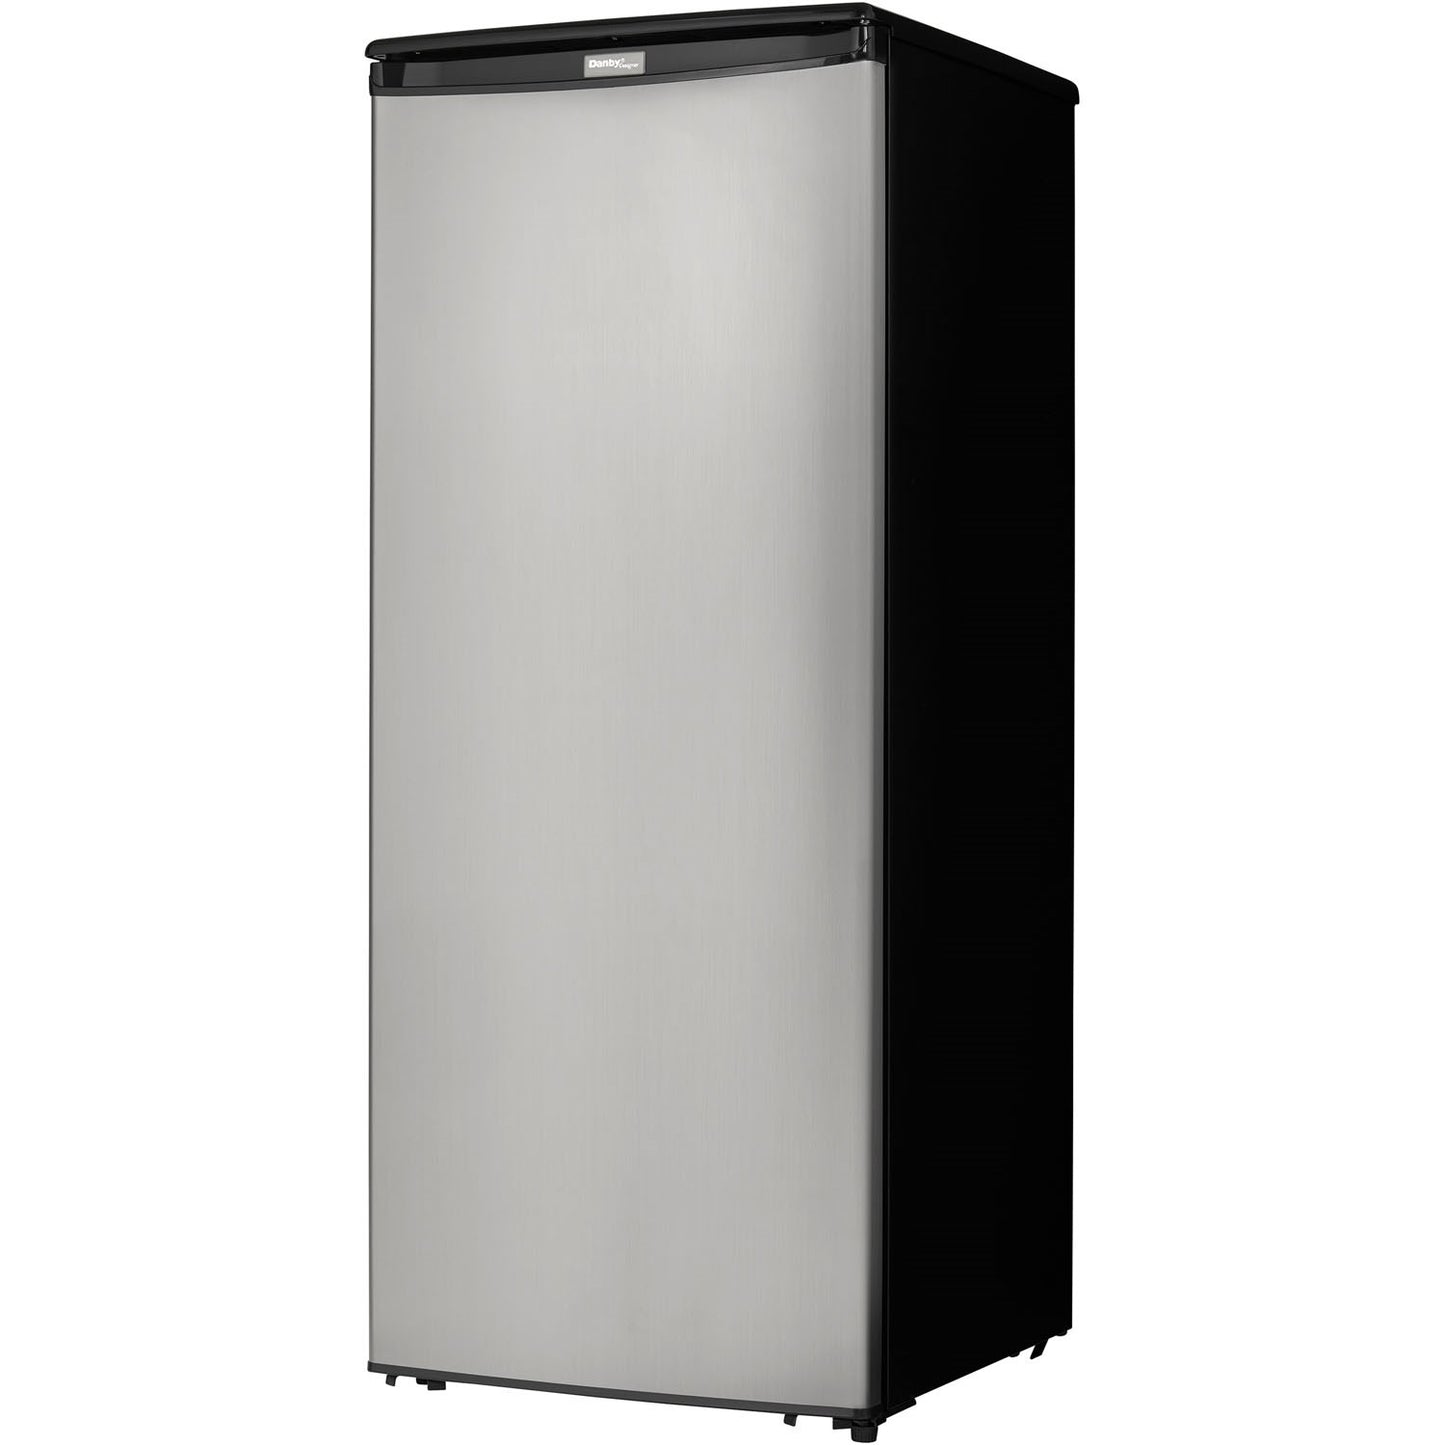 Danby 8.5 Cu.Ft. Upright Freezer, Manual Defrost, Mechanical Thermostat, Energy Star Rated